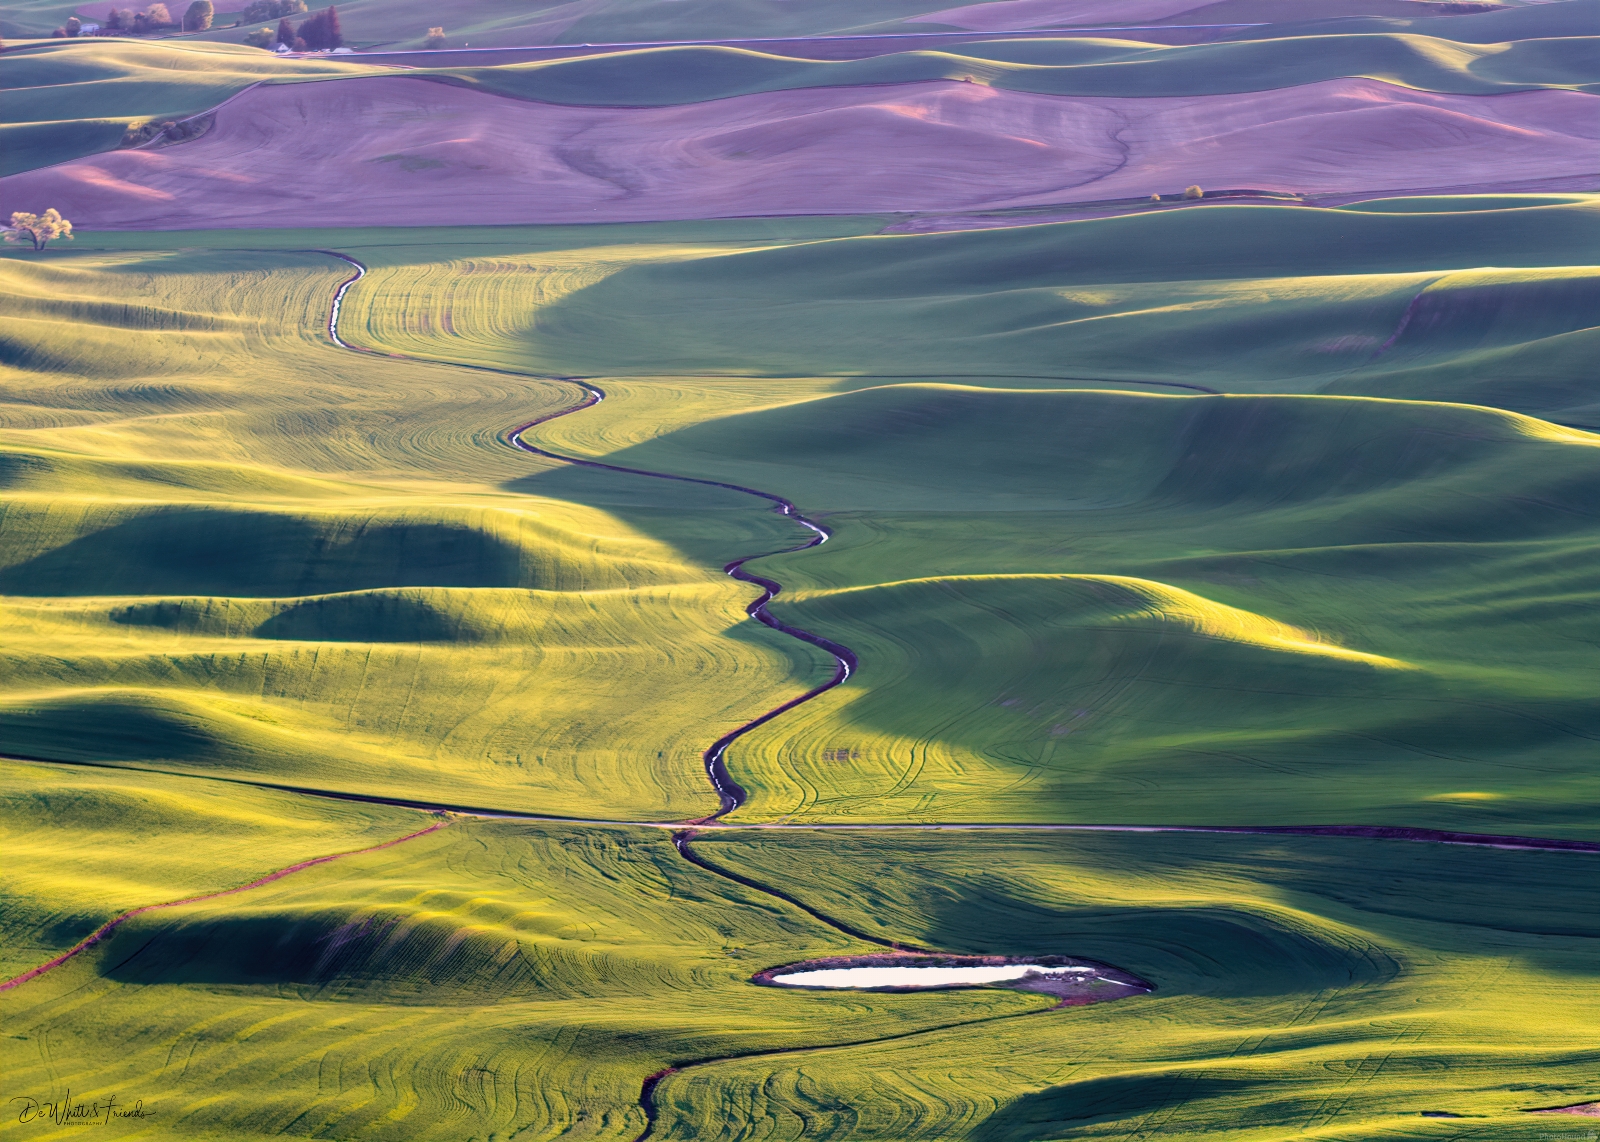 Image of South Steptoe Butte Viewpoint by Dale DeWhitt